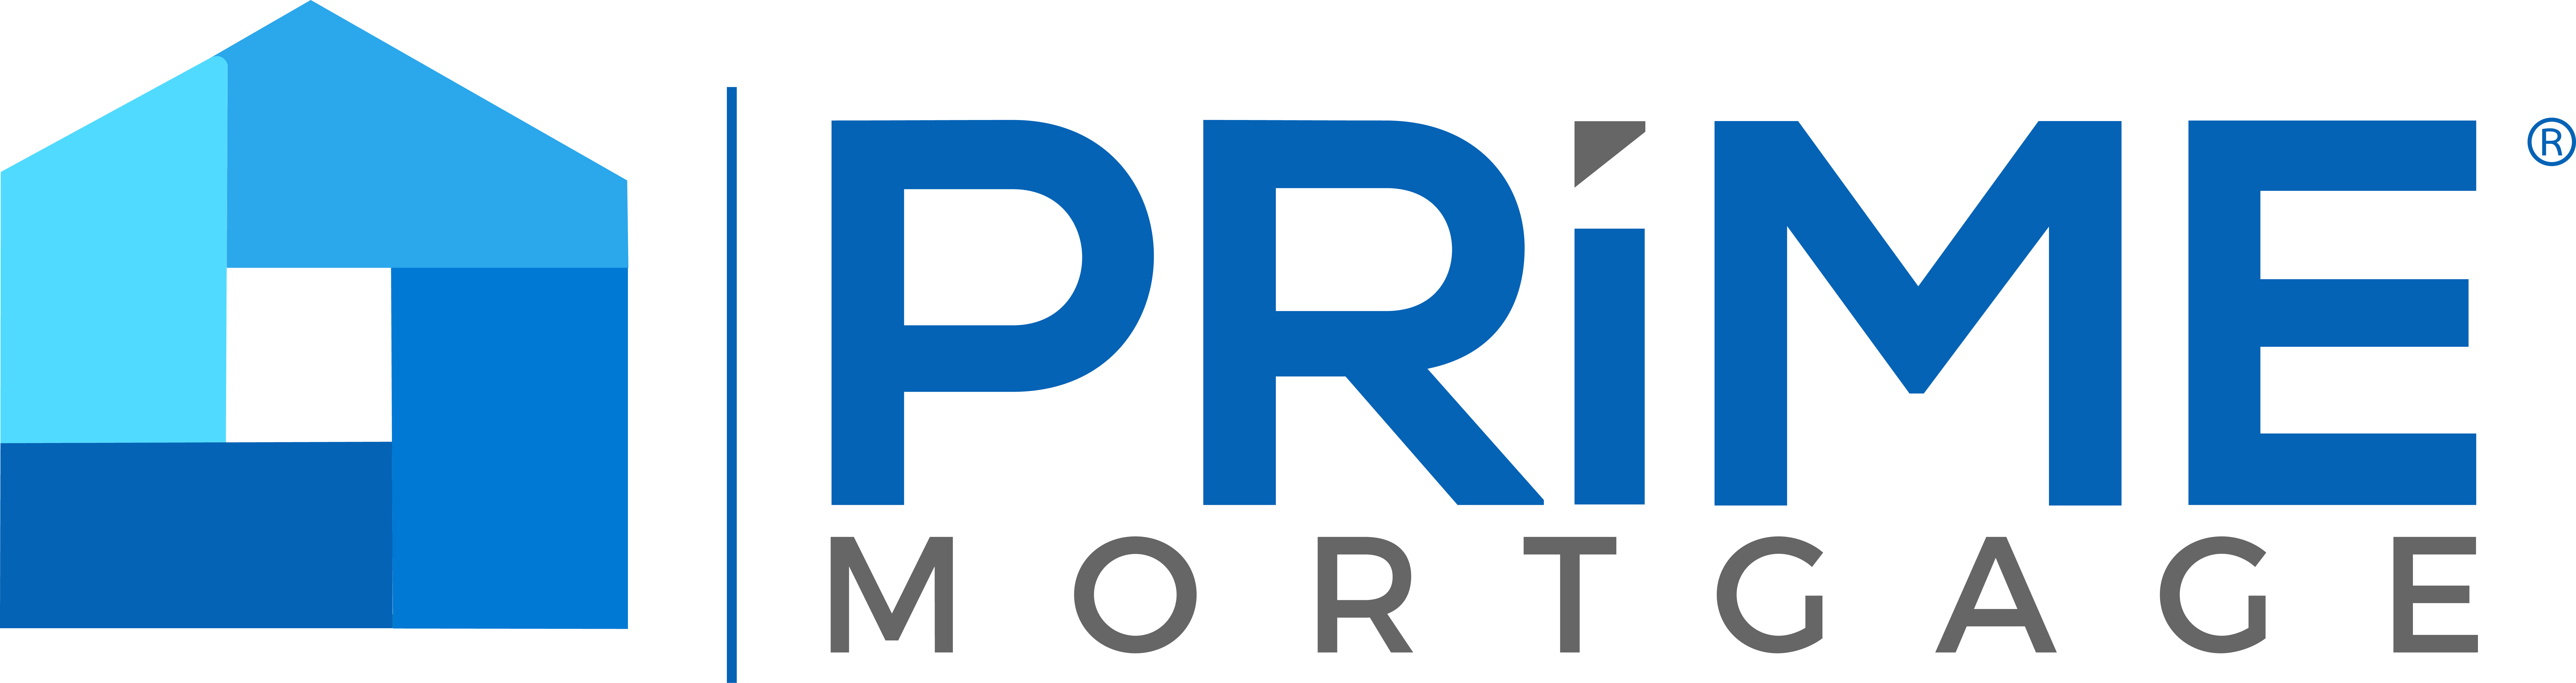 Prime Mortgage, a Trustworthy Mortgage Company in Costa Mesa, Offers Competitive Mortgages and Refinancing Within 30 Days